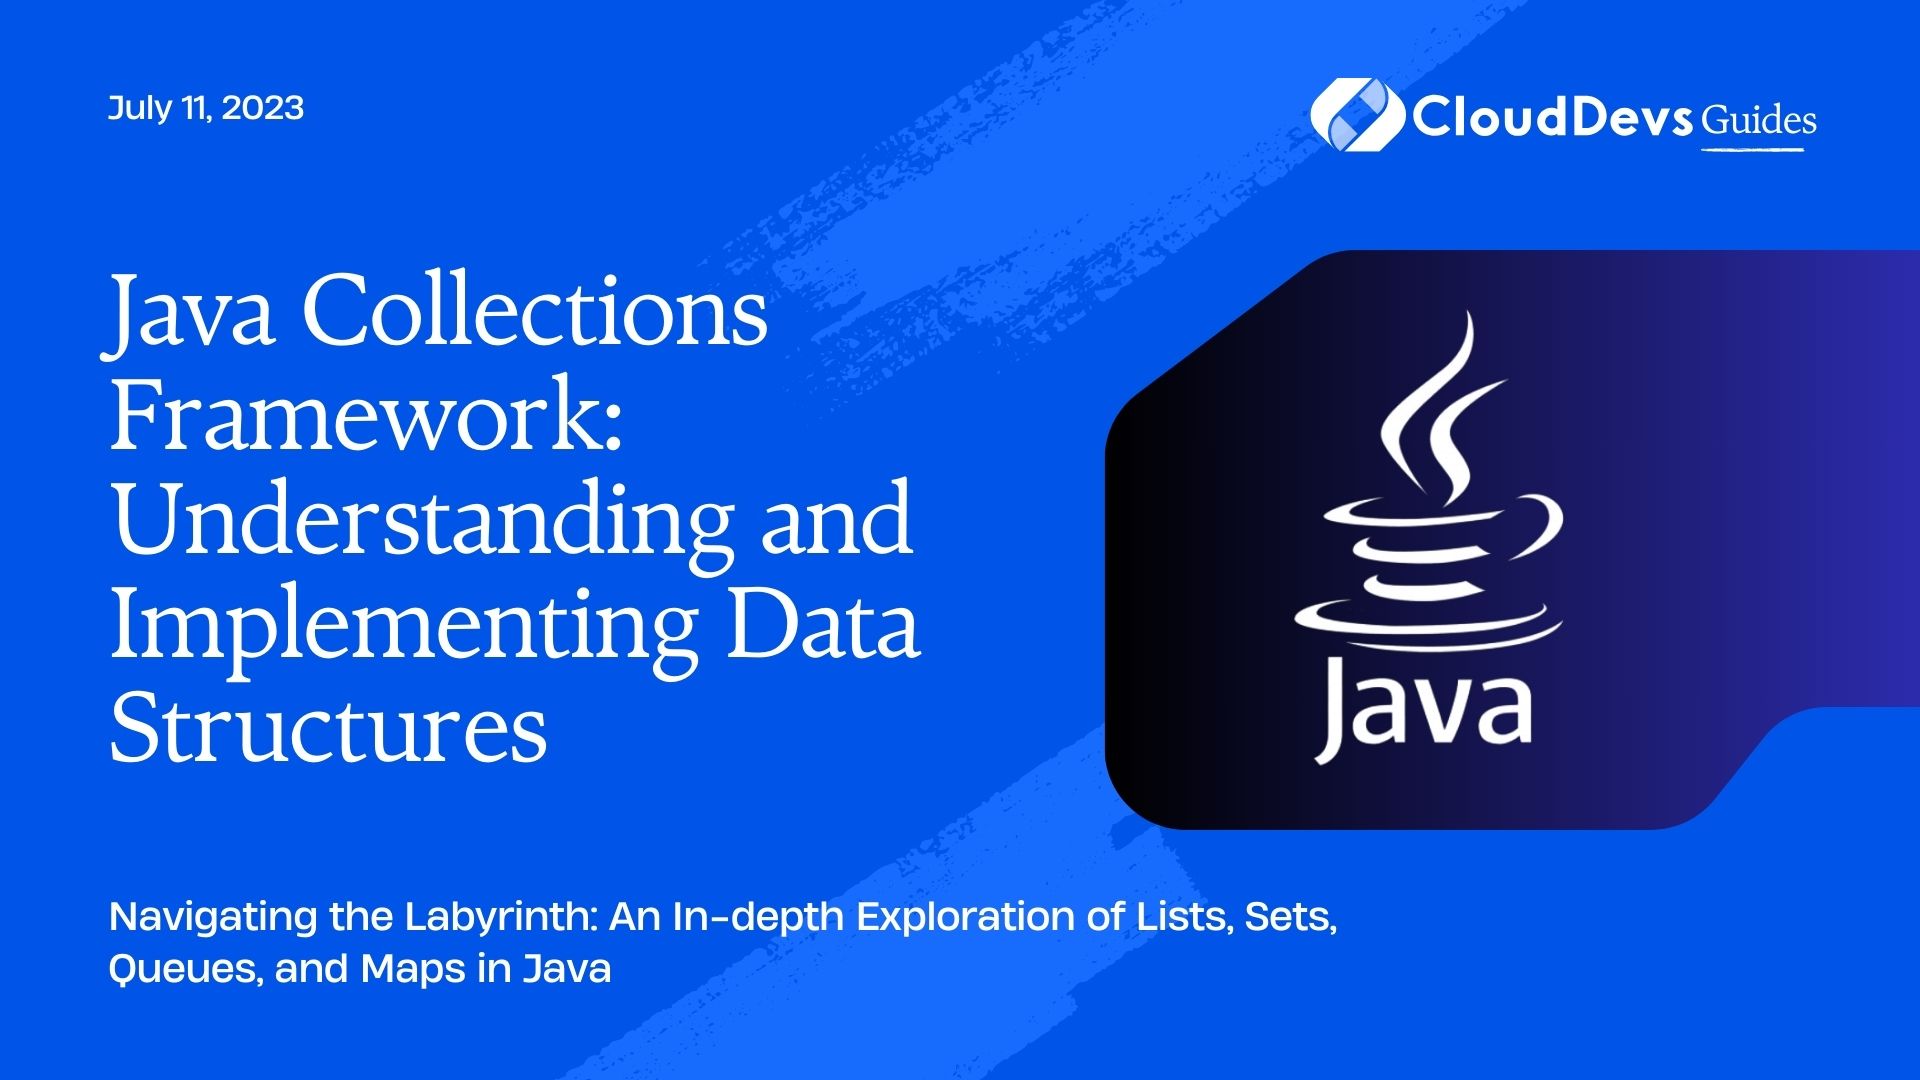 Java Collections Framework: Understanding and Implementing Data Structures